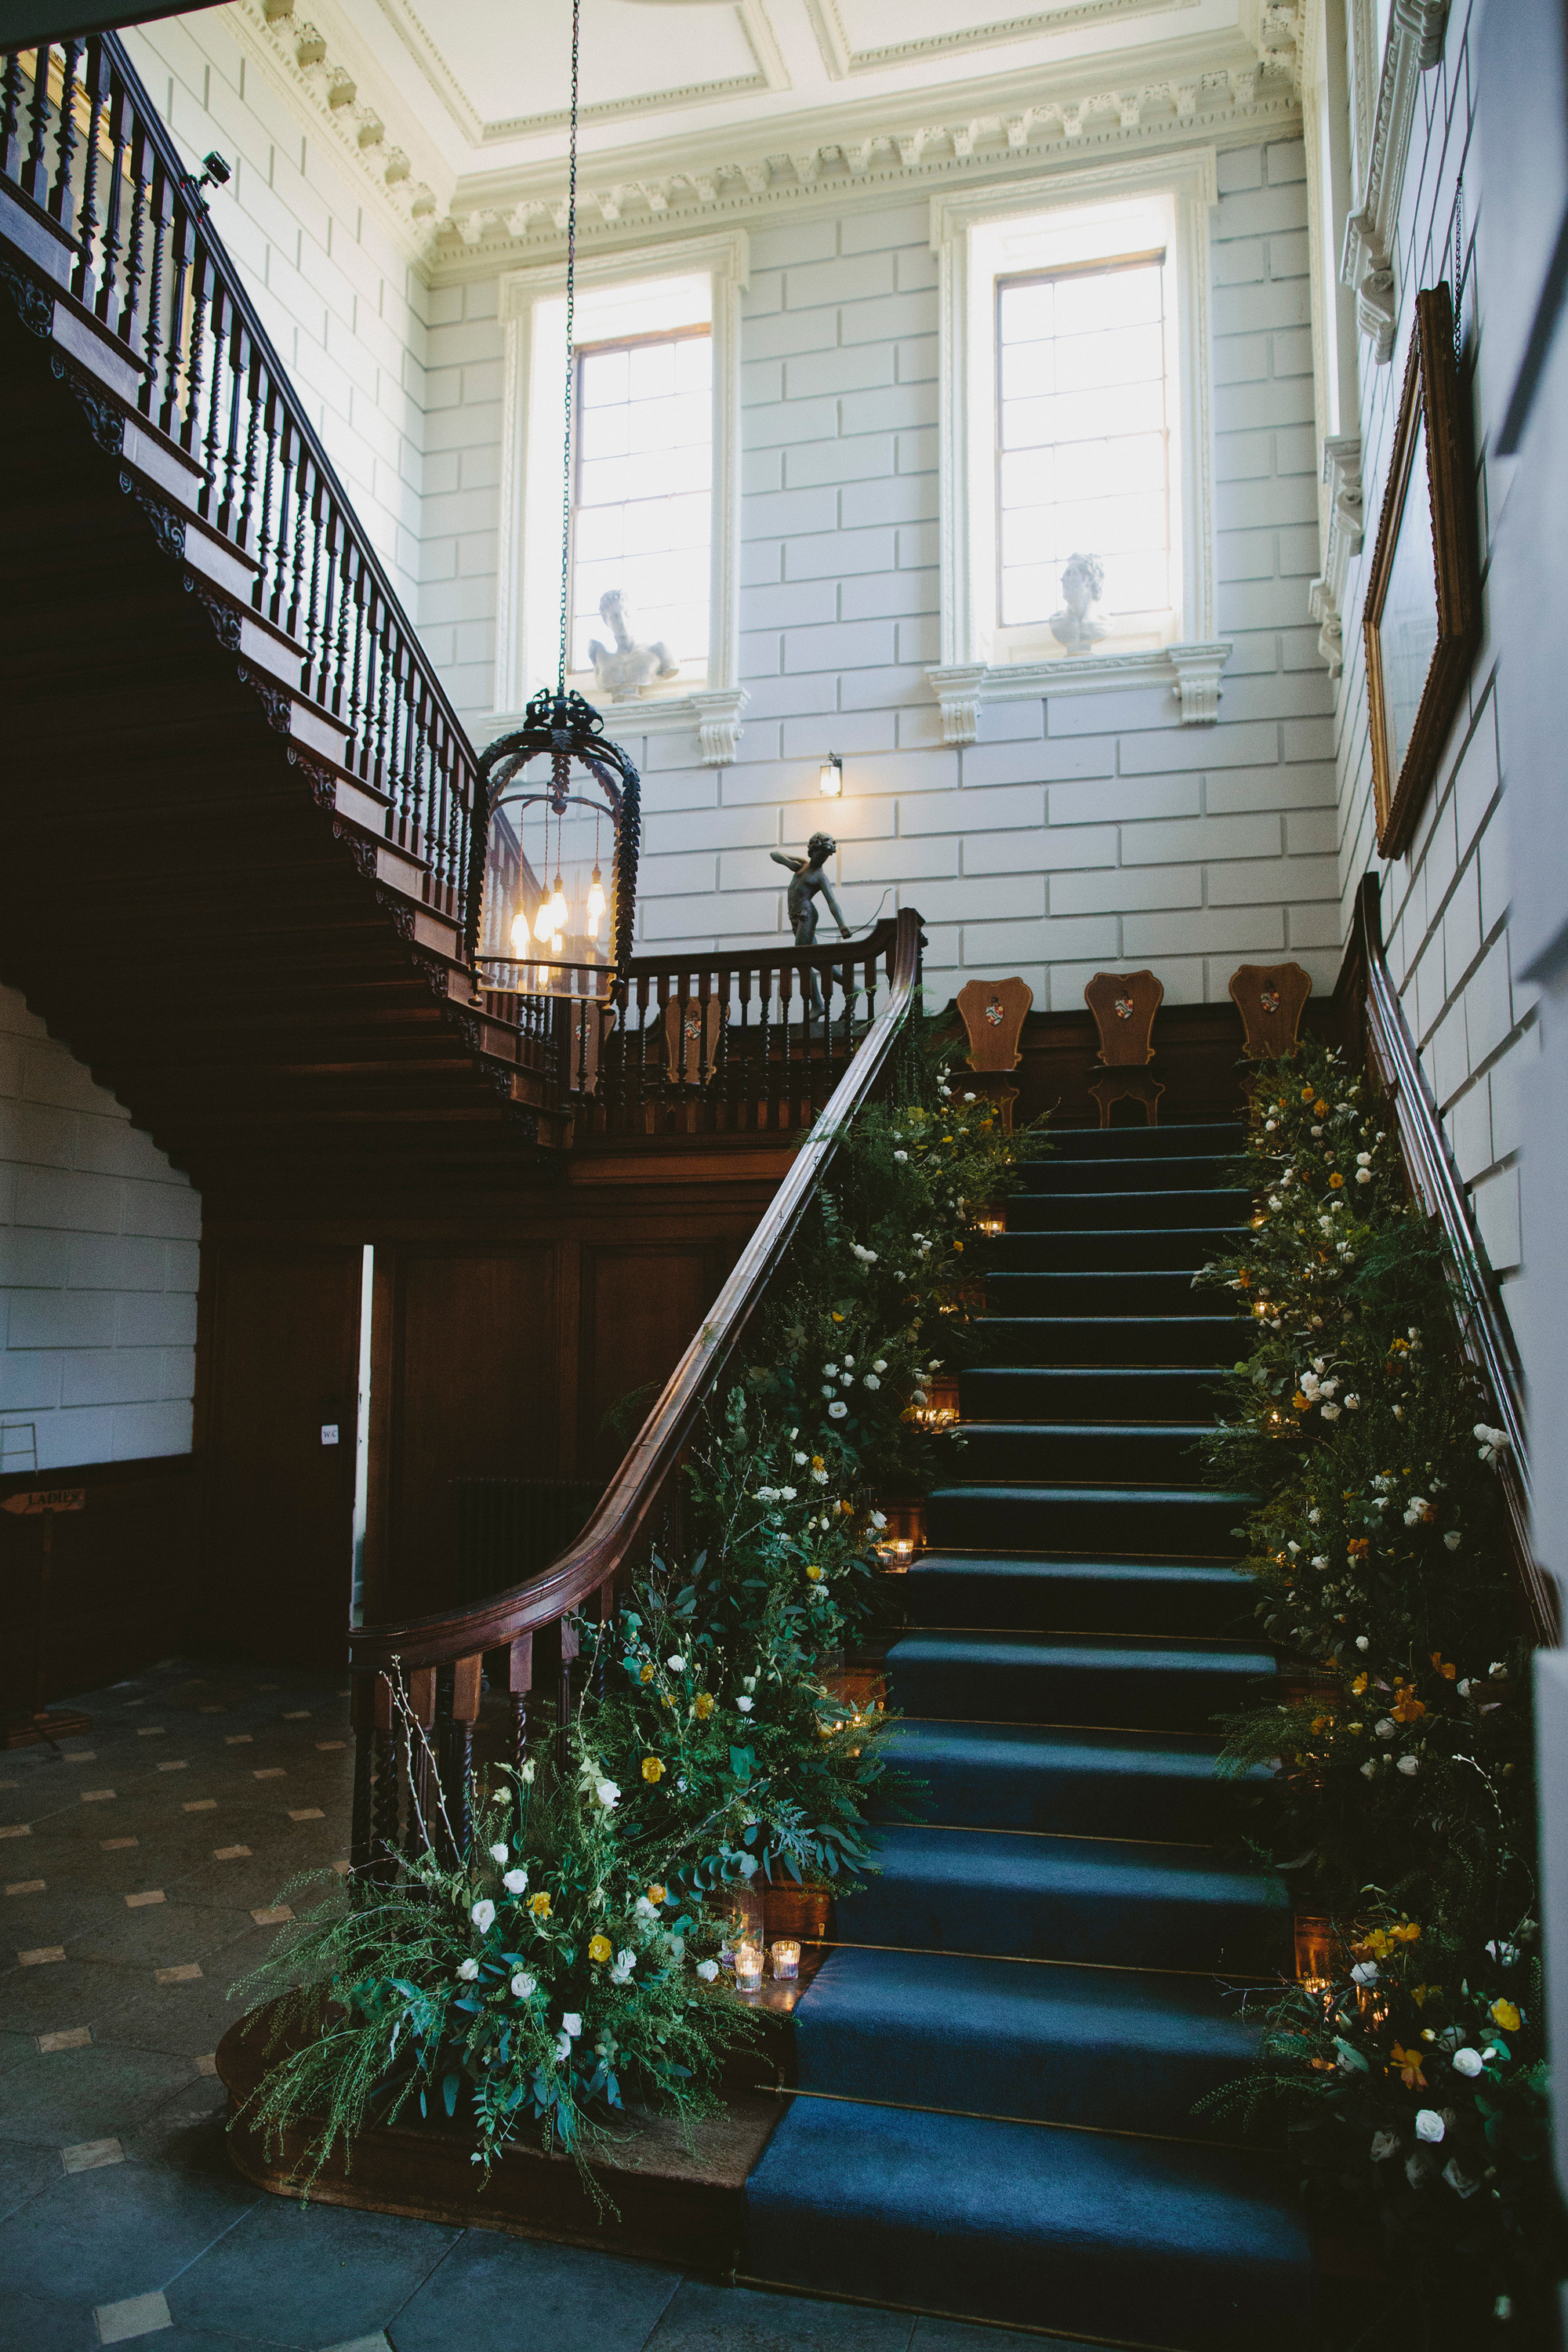 Davenport House wedding venue with sweeping staircase